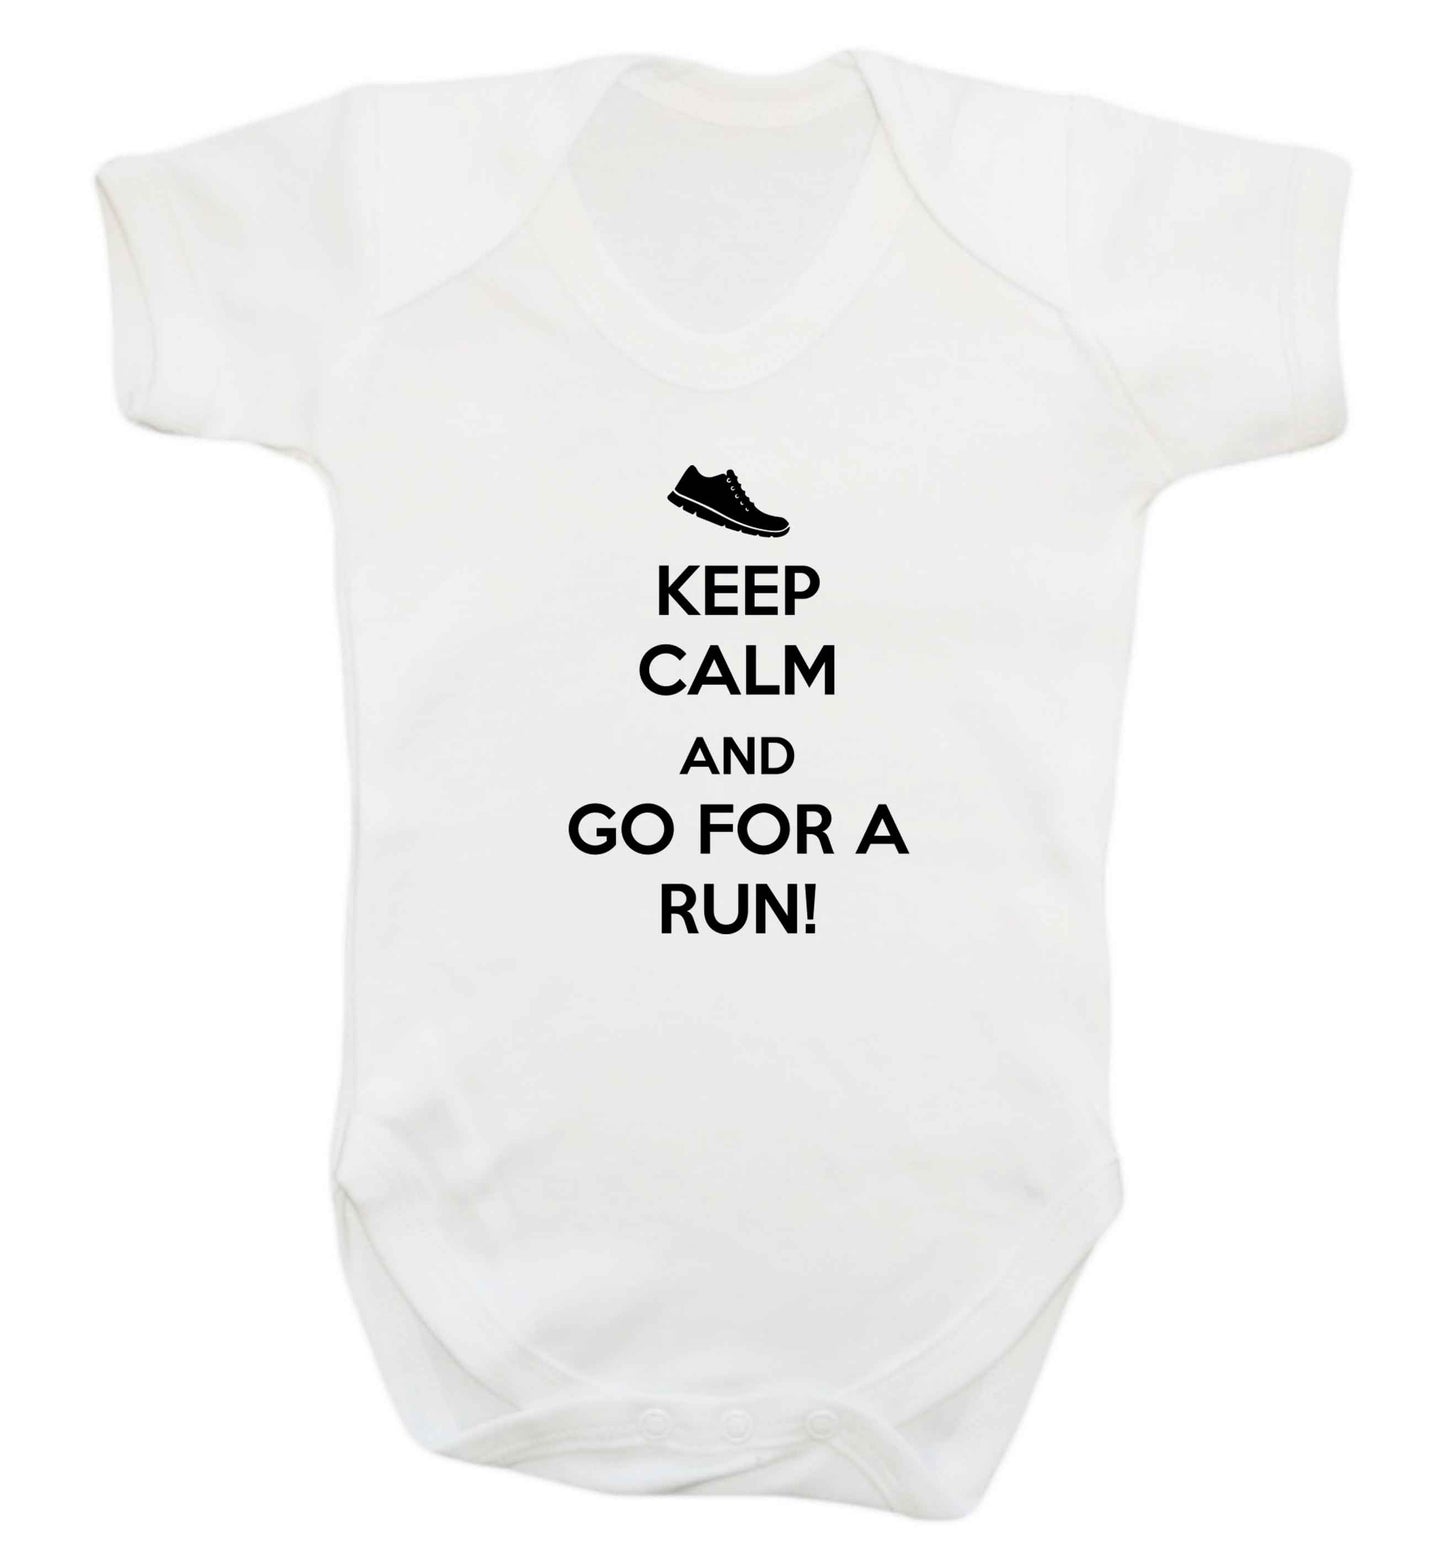 Keep calm and go for a run baby vest white 18-24 months